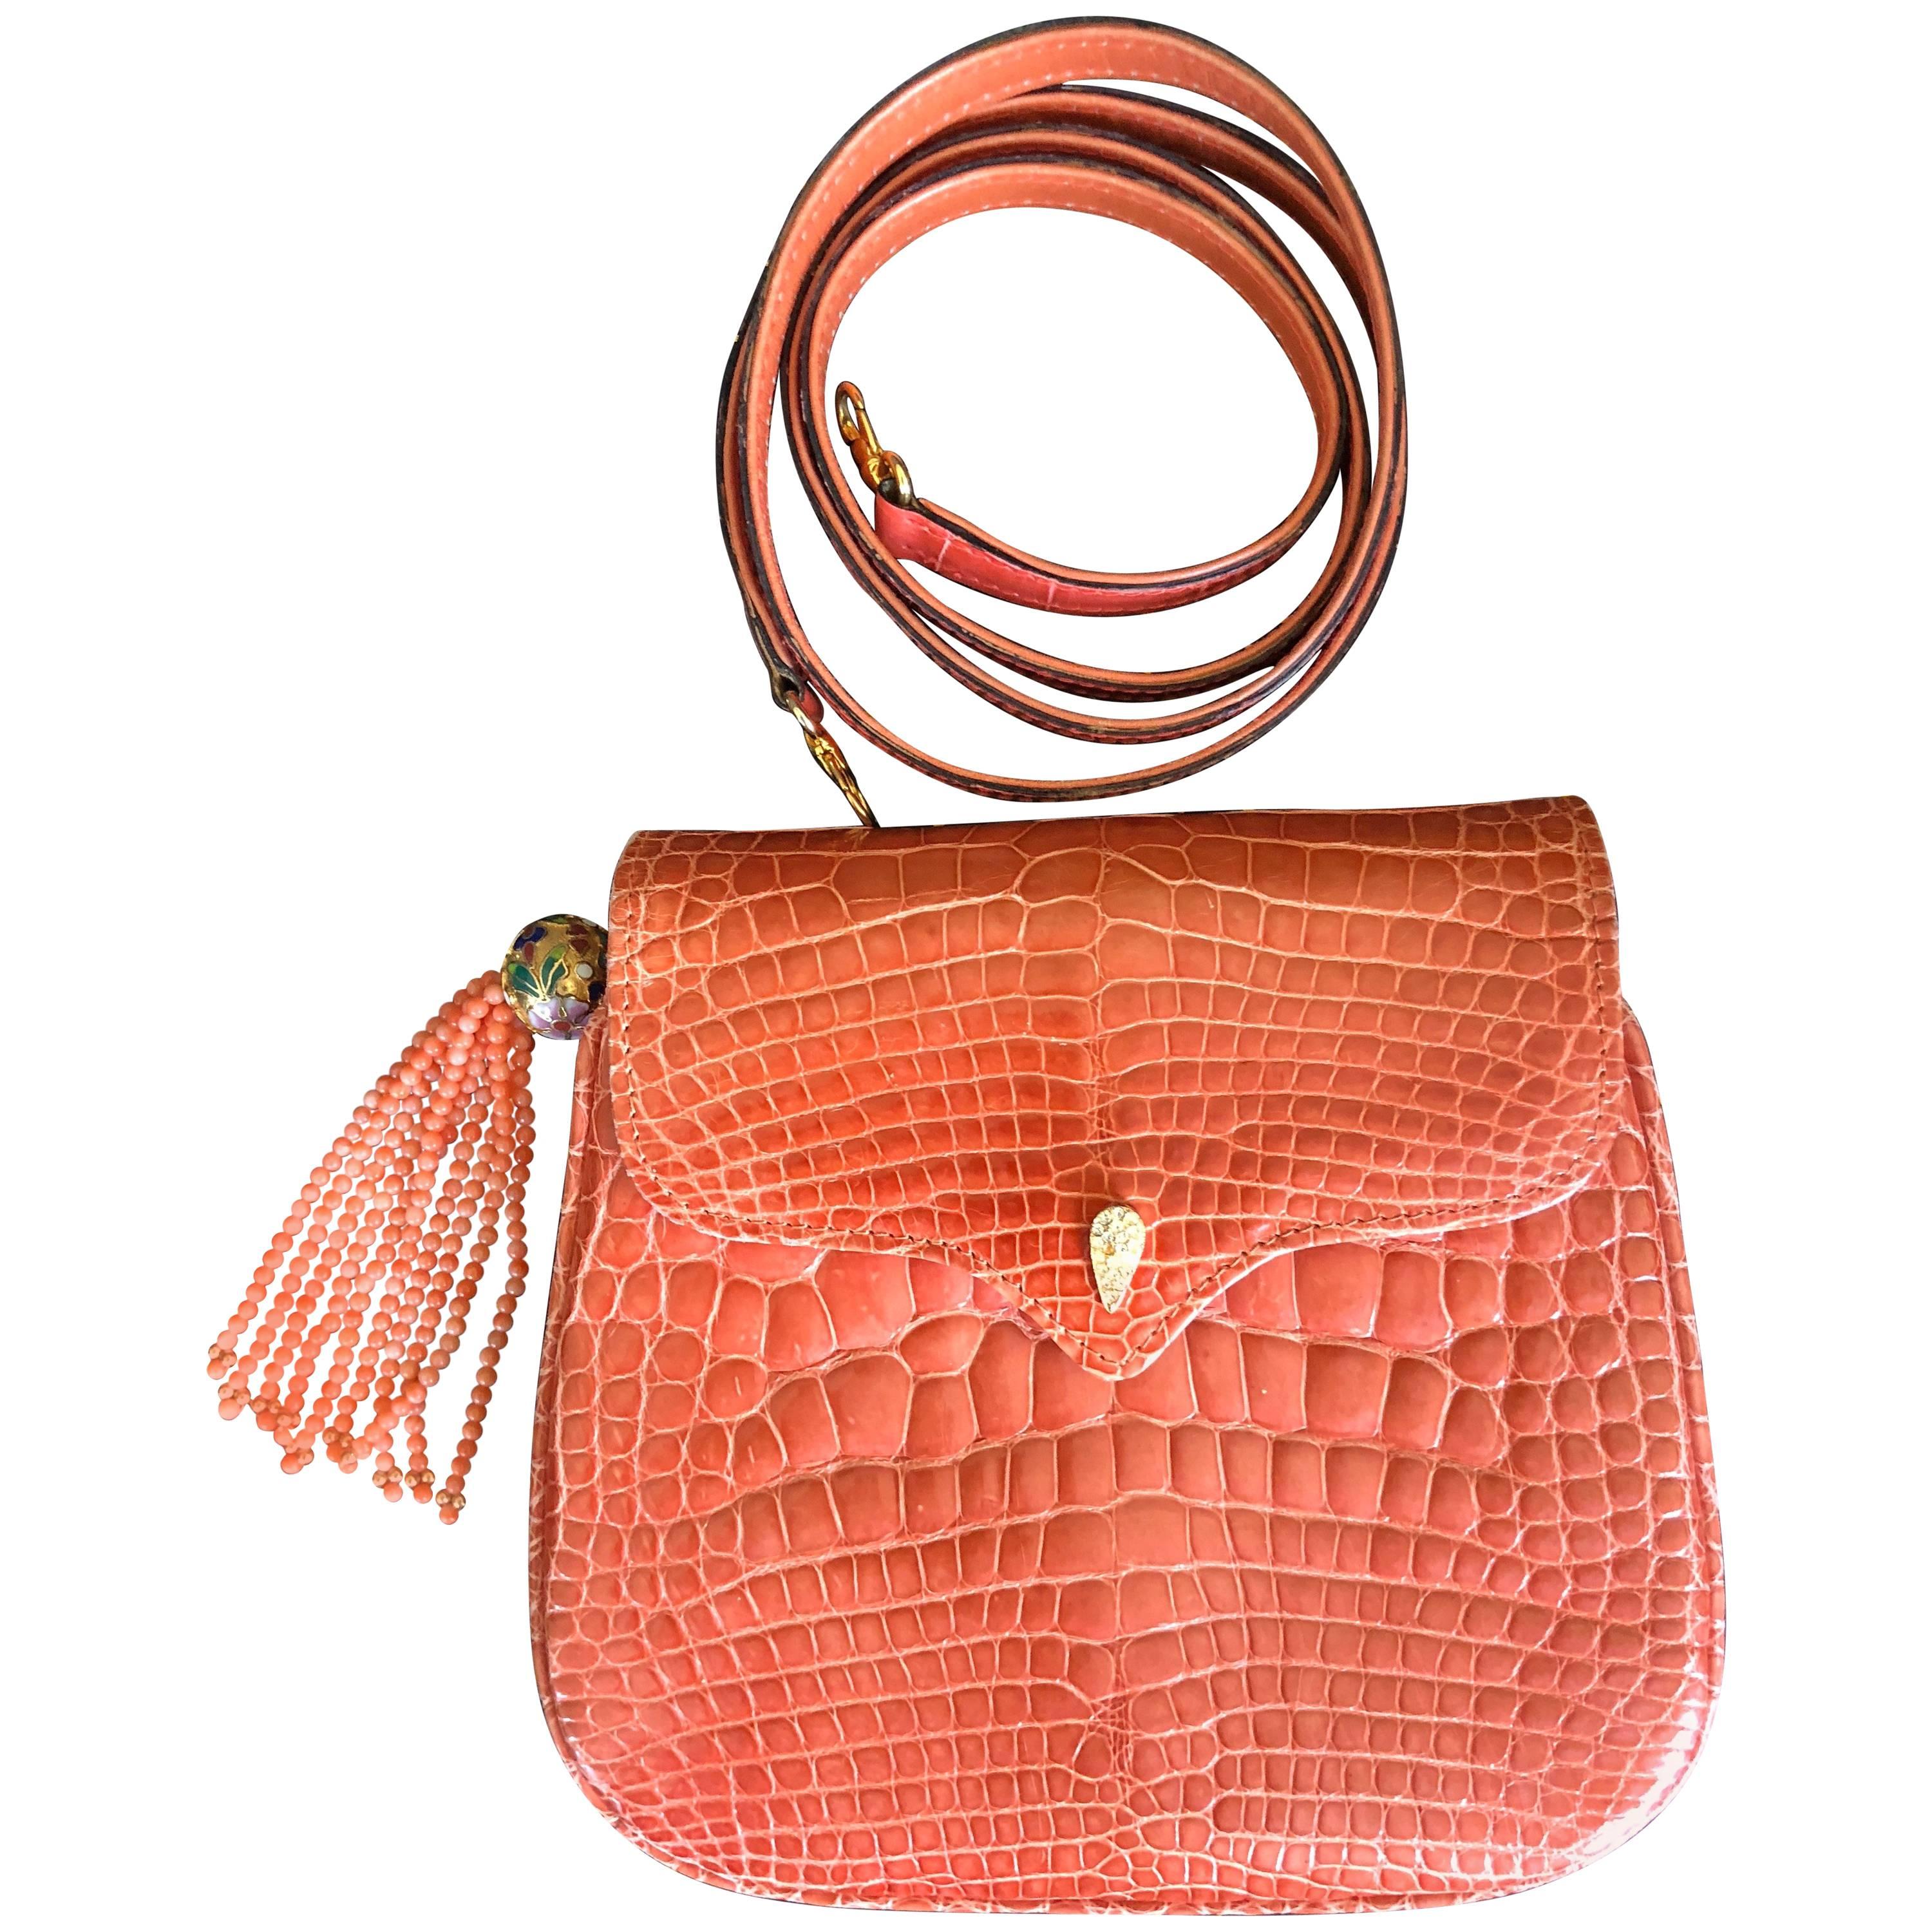  Lana of London Exquisite Orange Crocodile Evening Bag with Coral Bead Strap For Sale